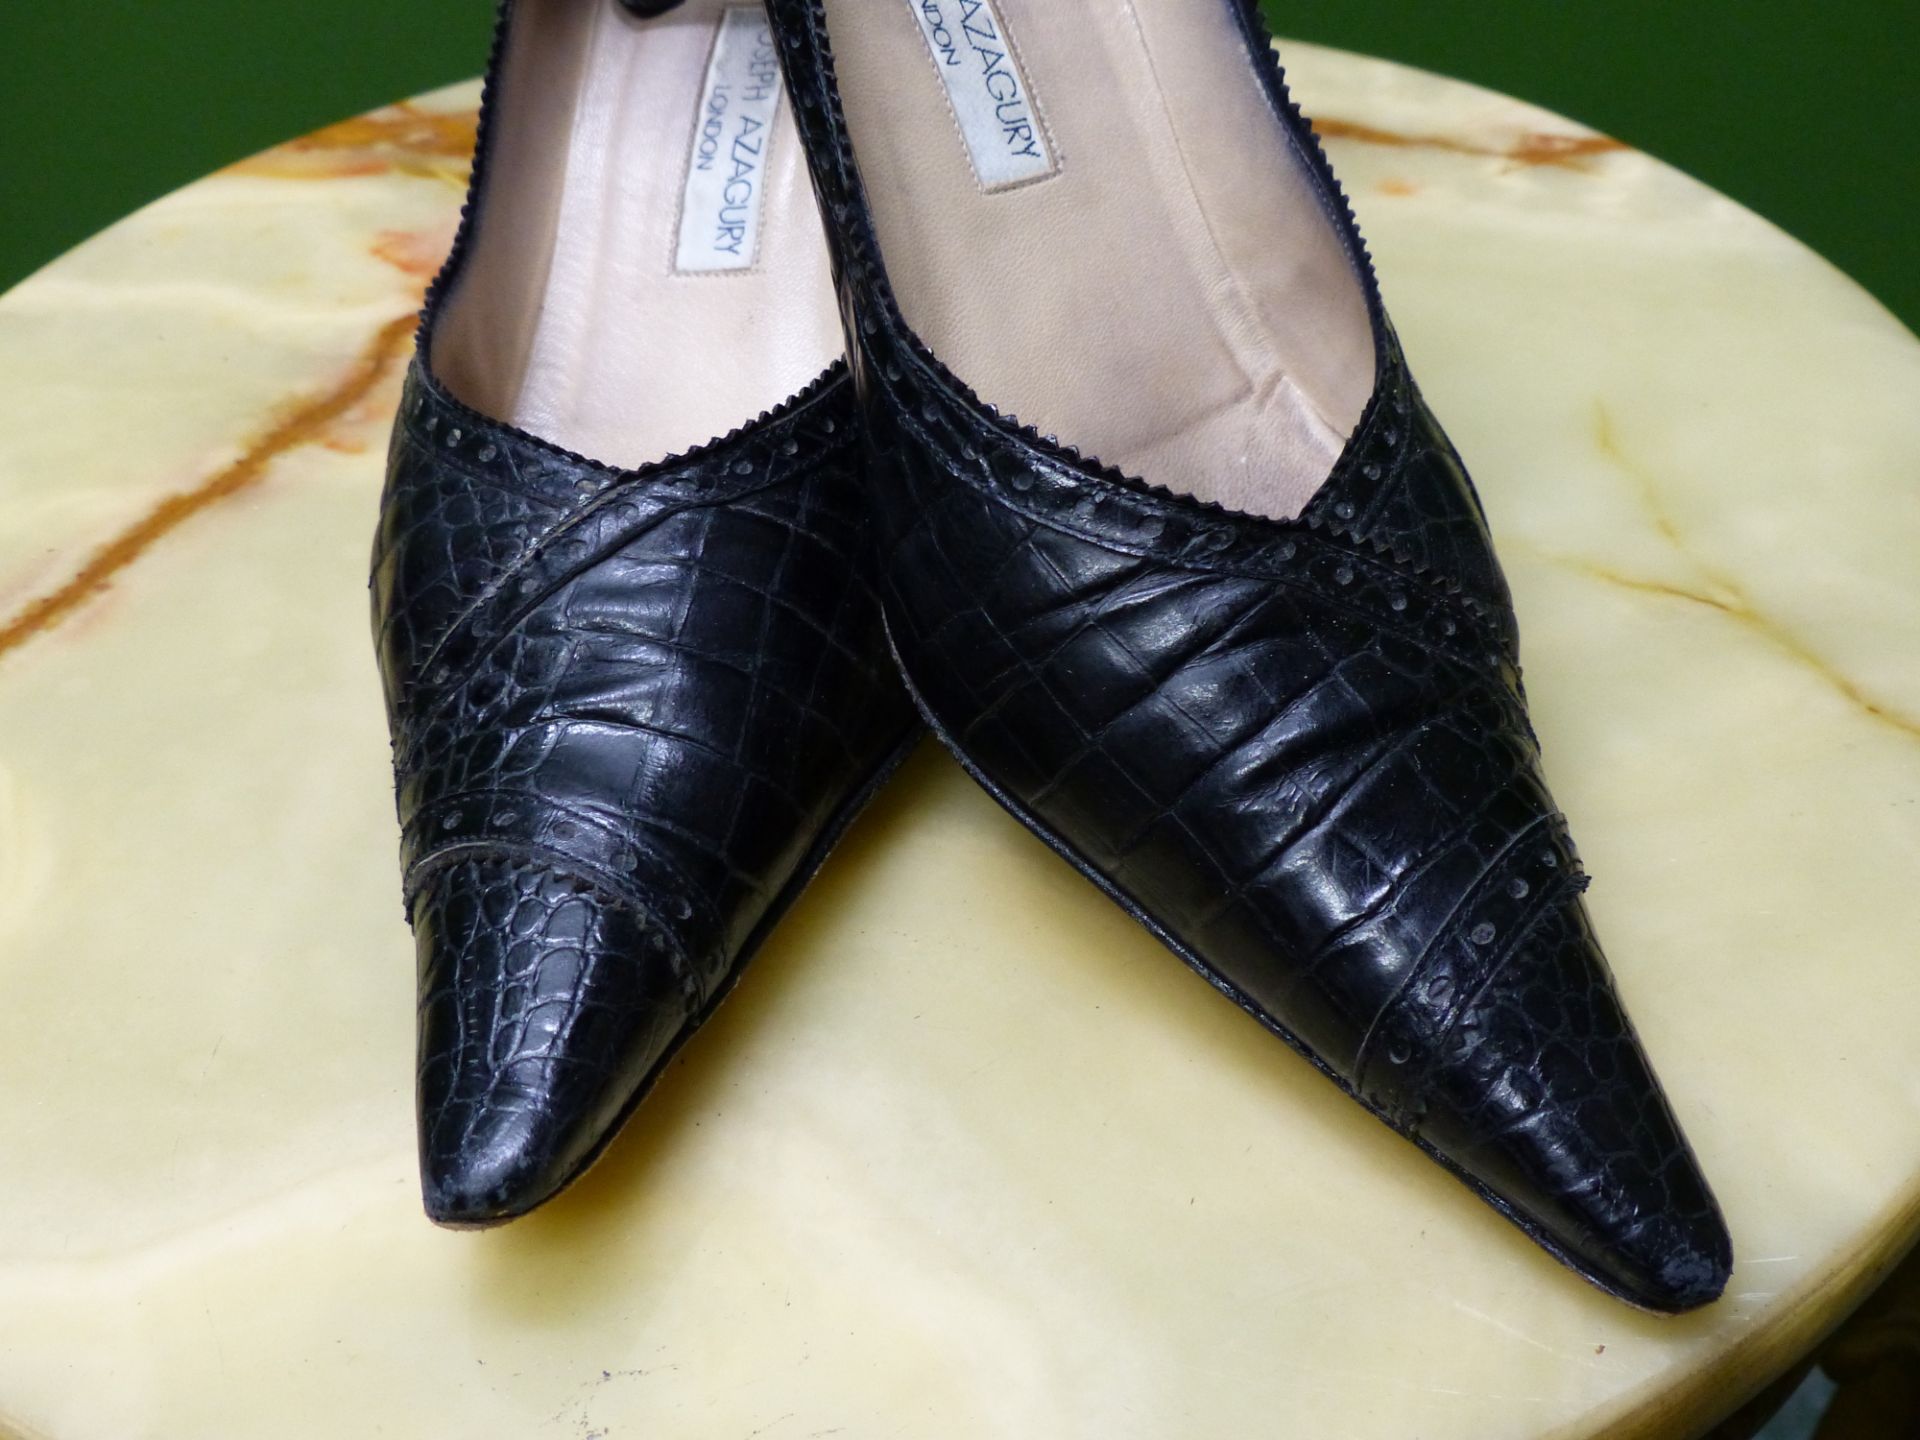 SHOES. THREE PAIR OF JOSEPH AZAGURY LONDON. SUEDE BROWN FLATS EUR SIZE 39. BLACK LEATHER AND SUEDE - Image 4 of 15